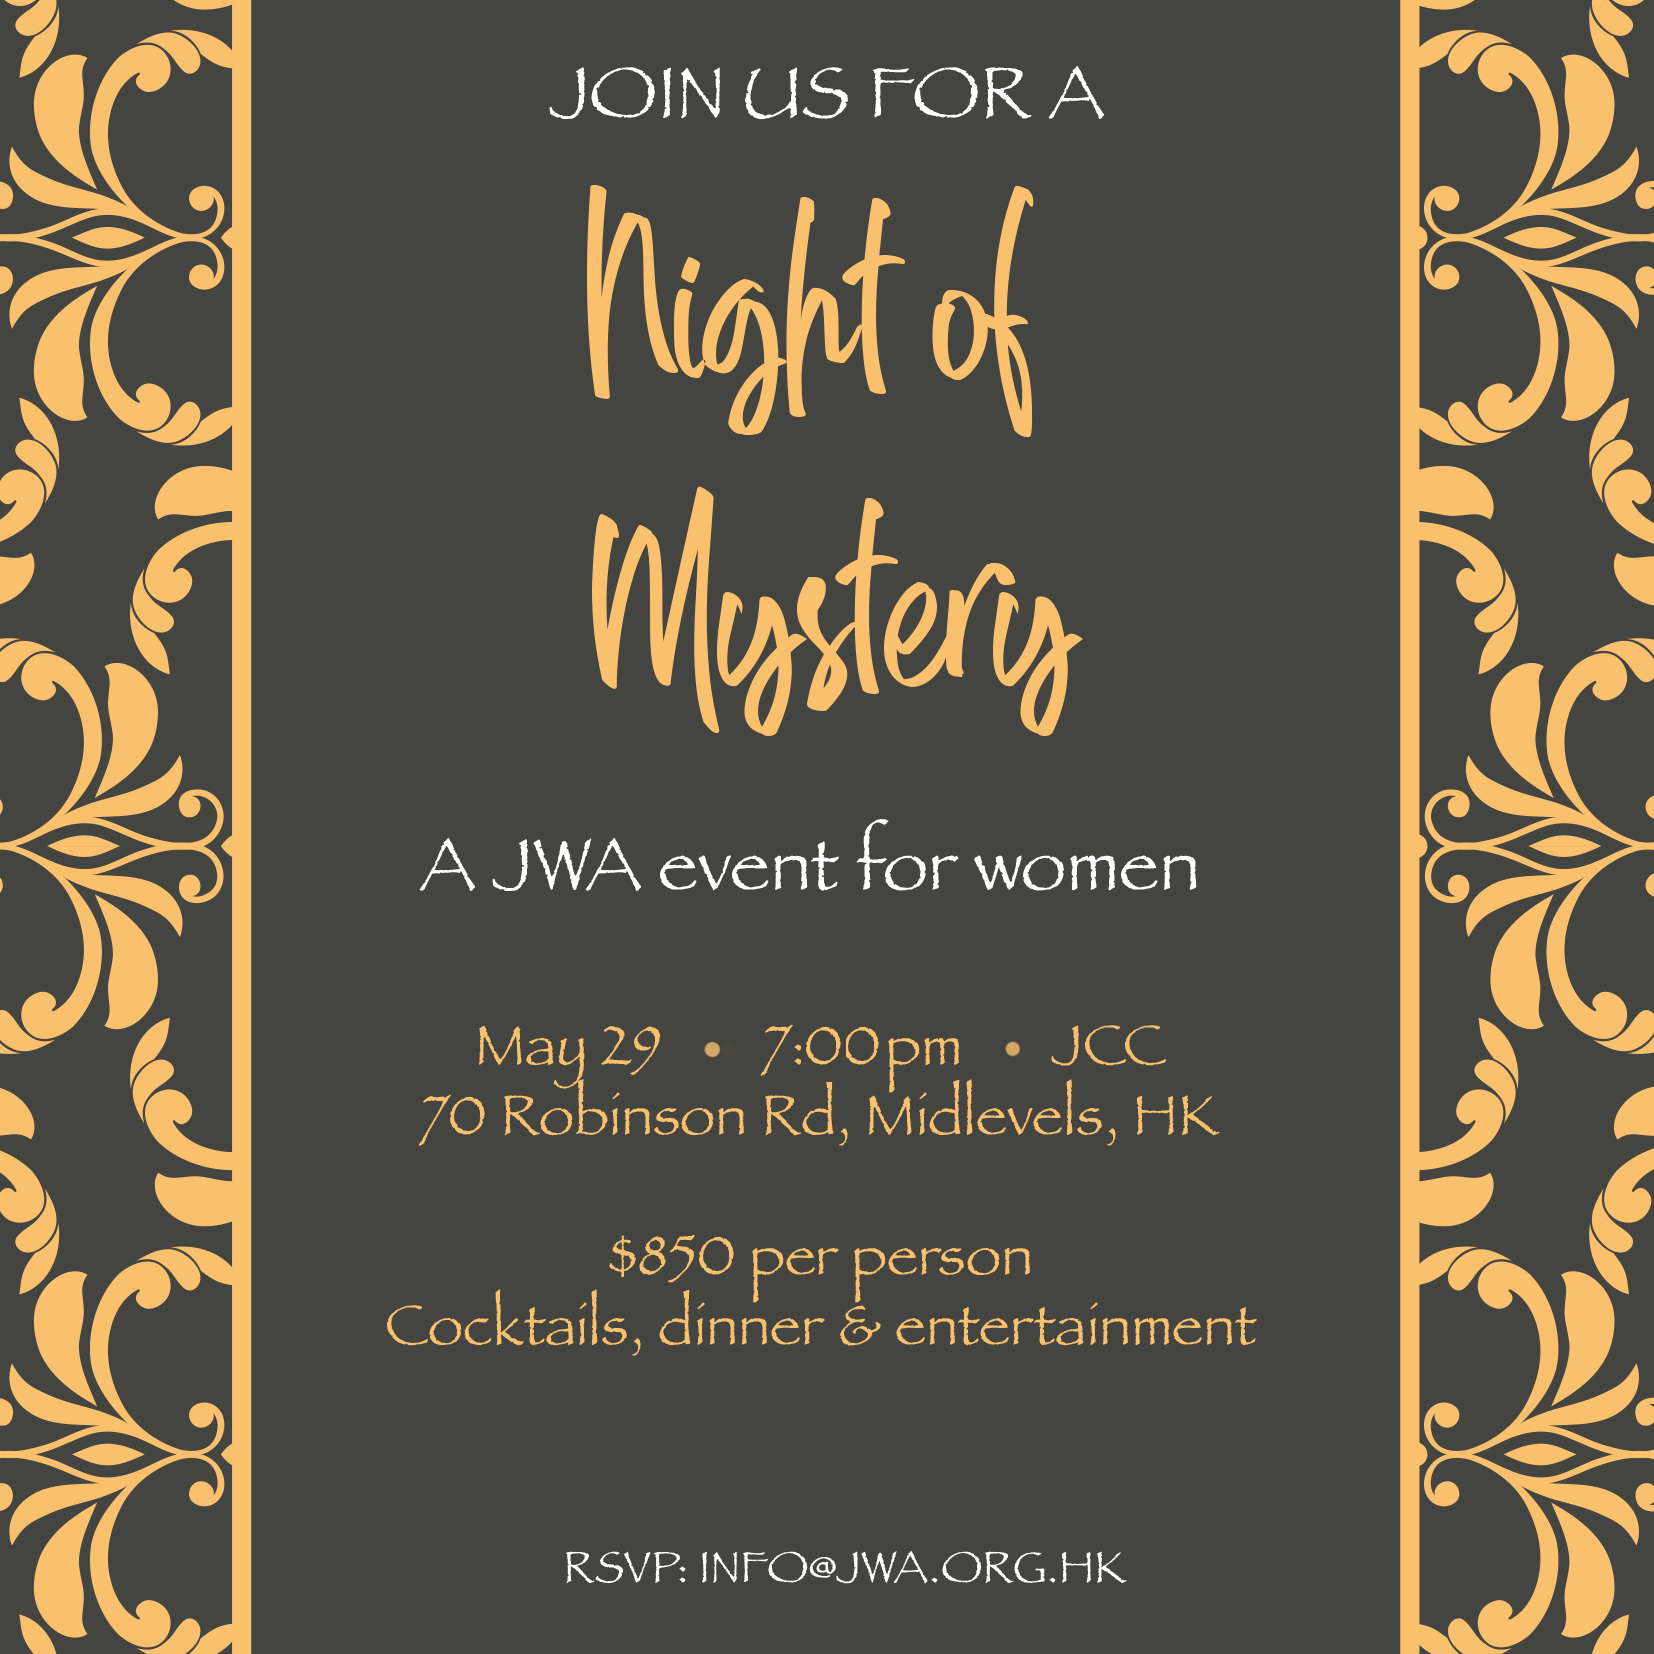 JWA Women's Event - A Night of Mystery - 29 May 2019 - 7pm